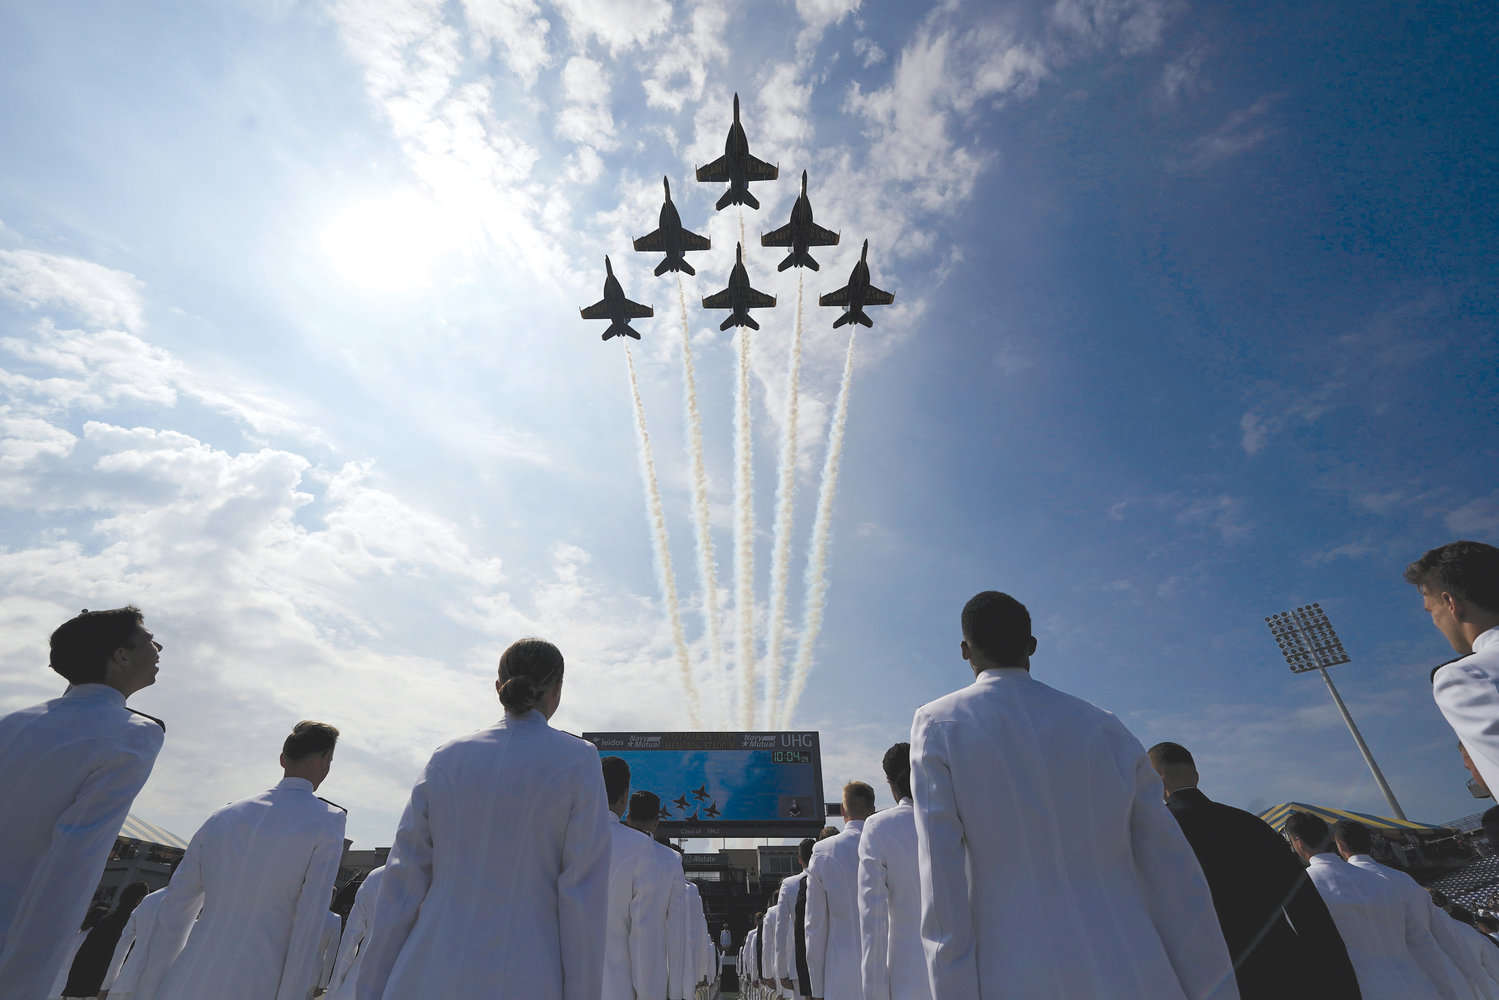 FLYING HIGH—The Blue Angels fly overhead to start the graduation and commissioning ceremony May 28 for the U.S. Naval Academy’s class of 2021 in Annapolis, Md. Cardinal Dolan spoke at the academy Oct. 26.